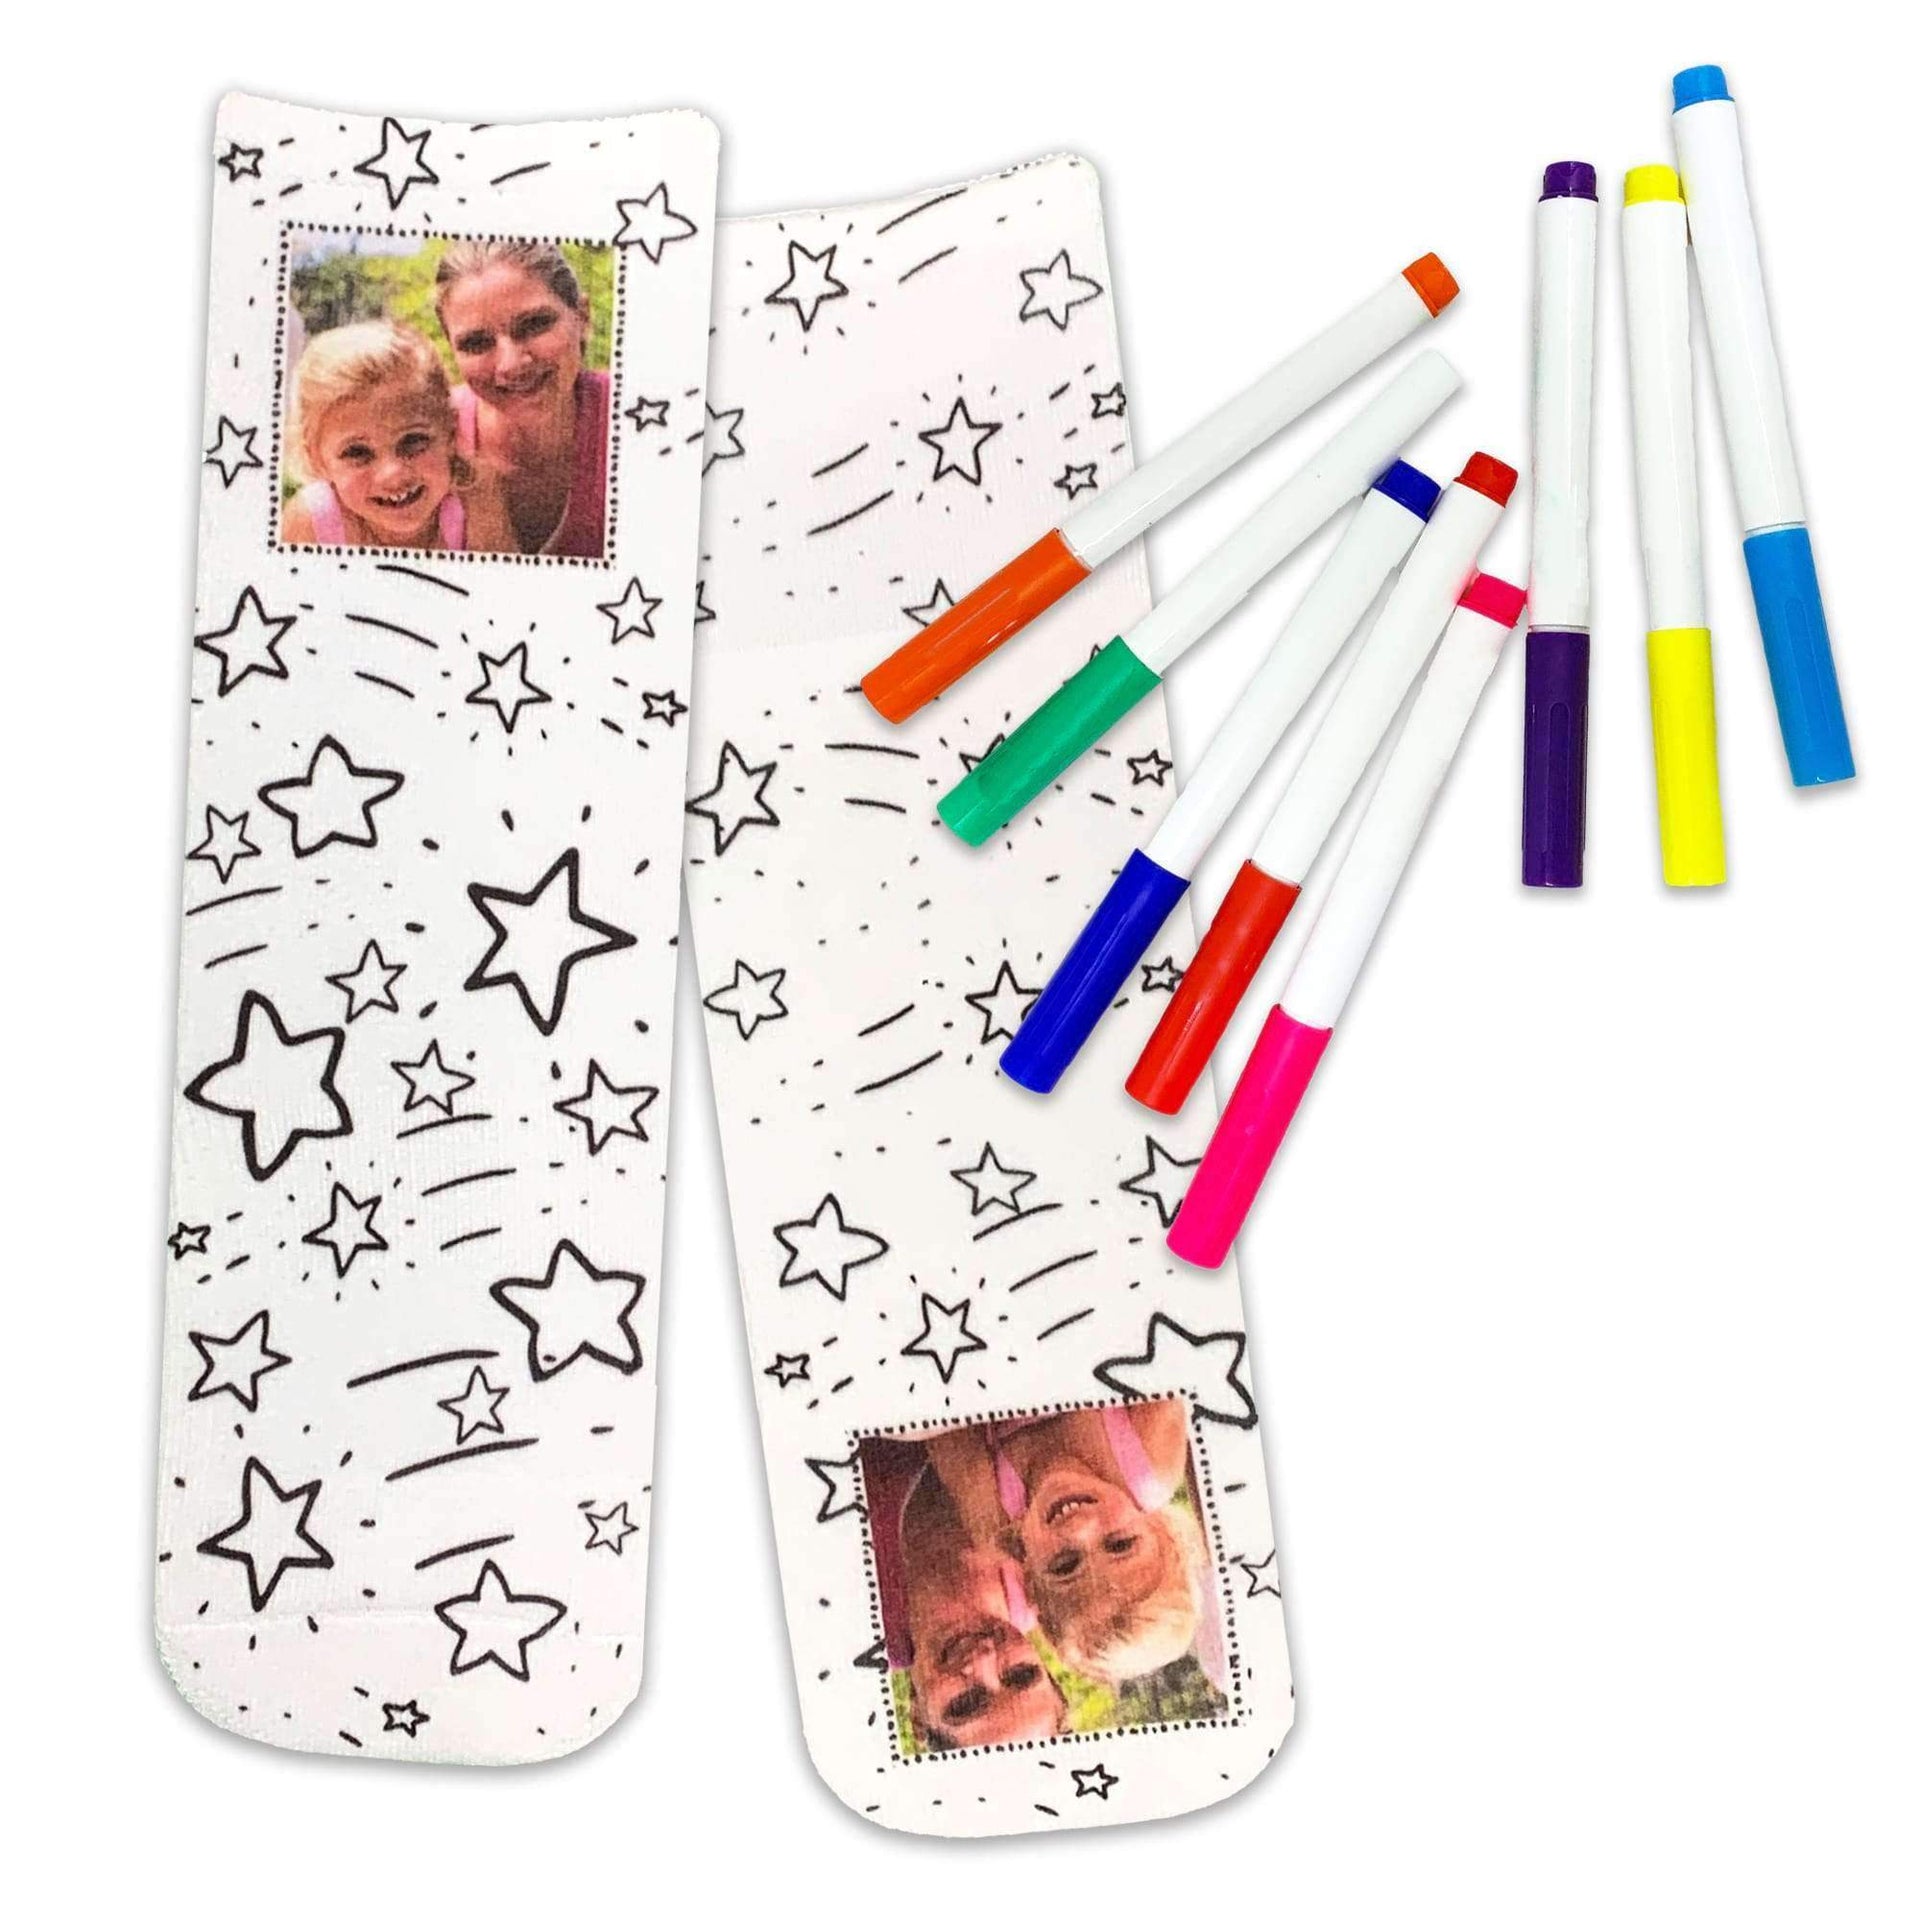 Custom printed color in star socks with pictures and custom printed with your photo included with free fabric markers these socks make the perfect gift.